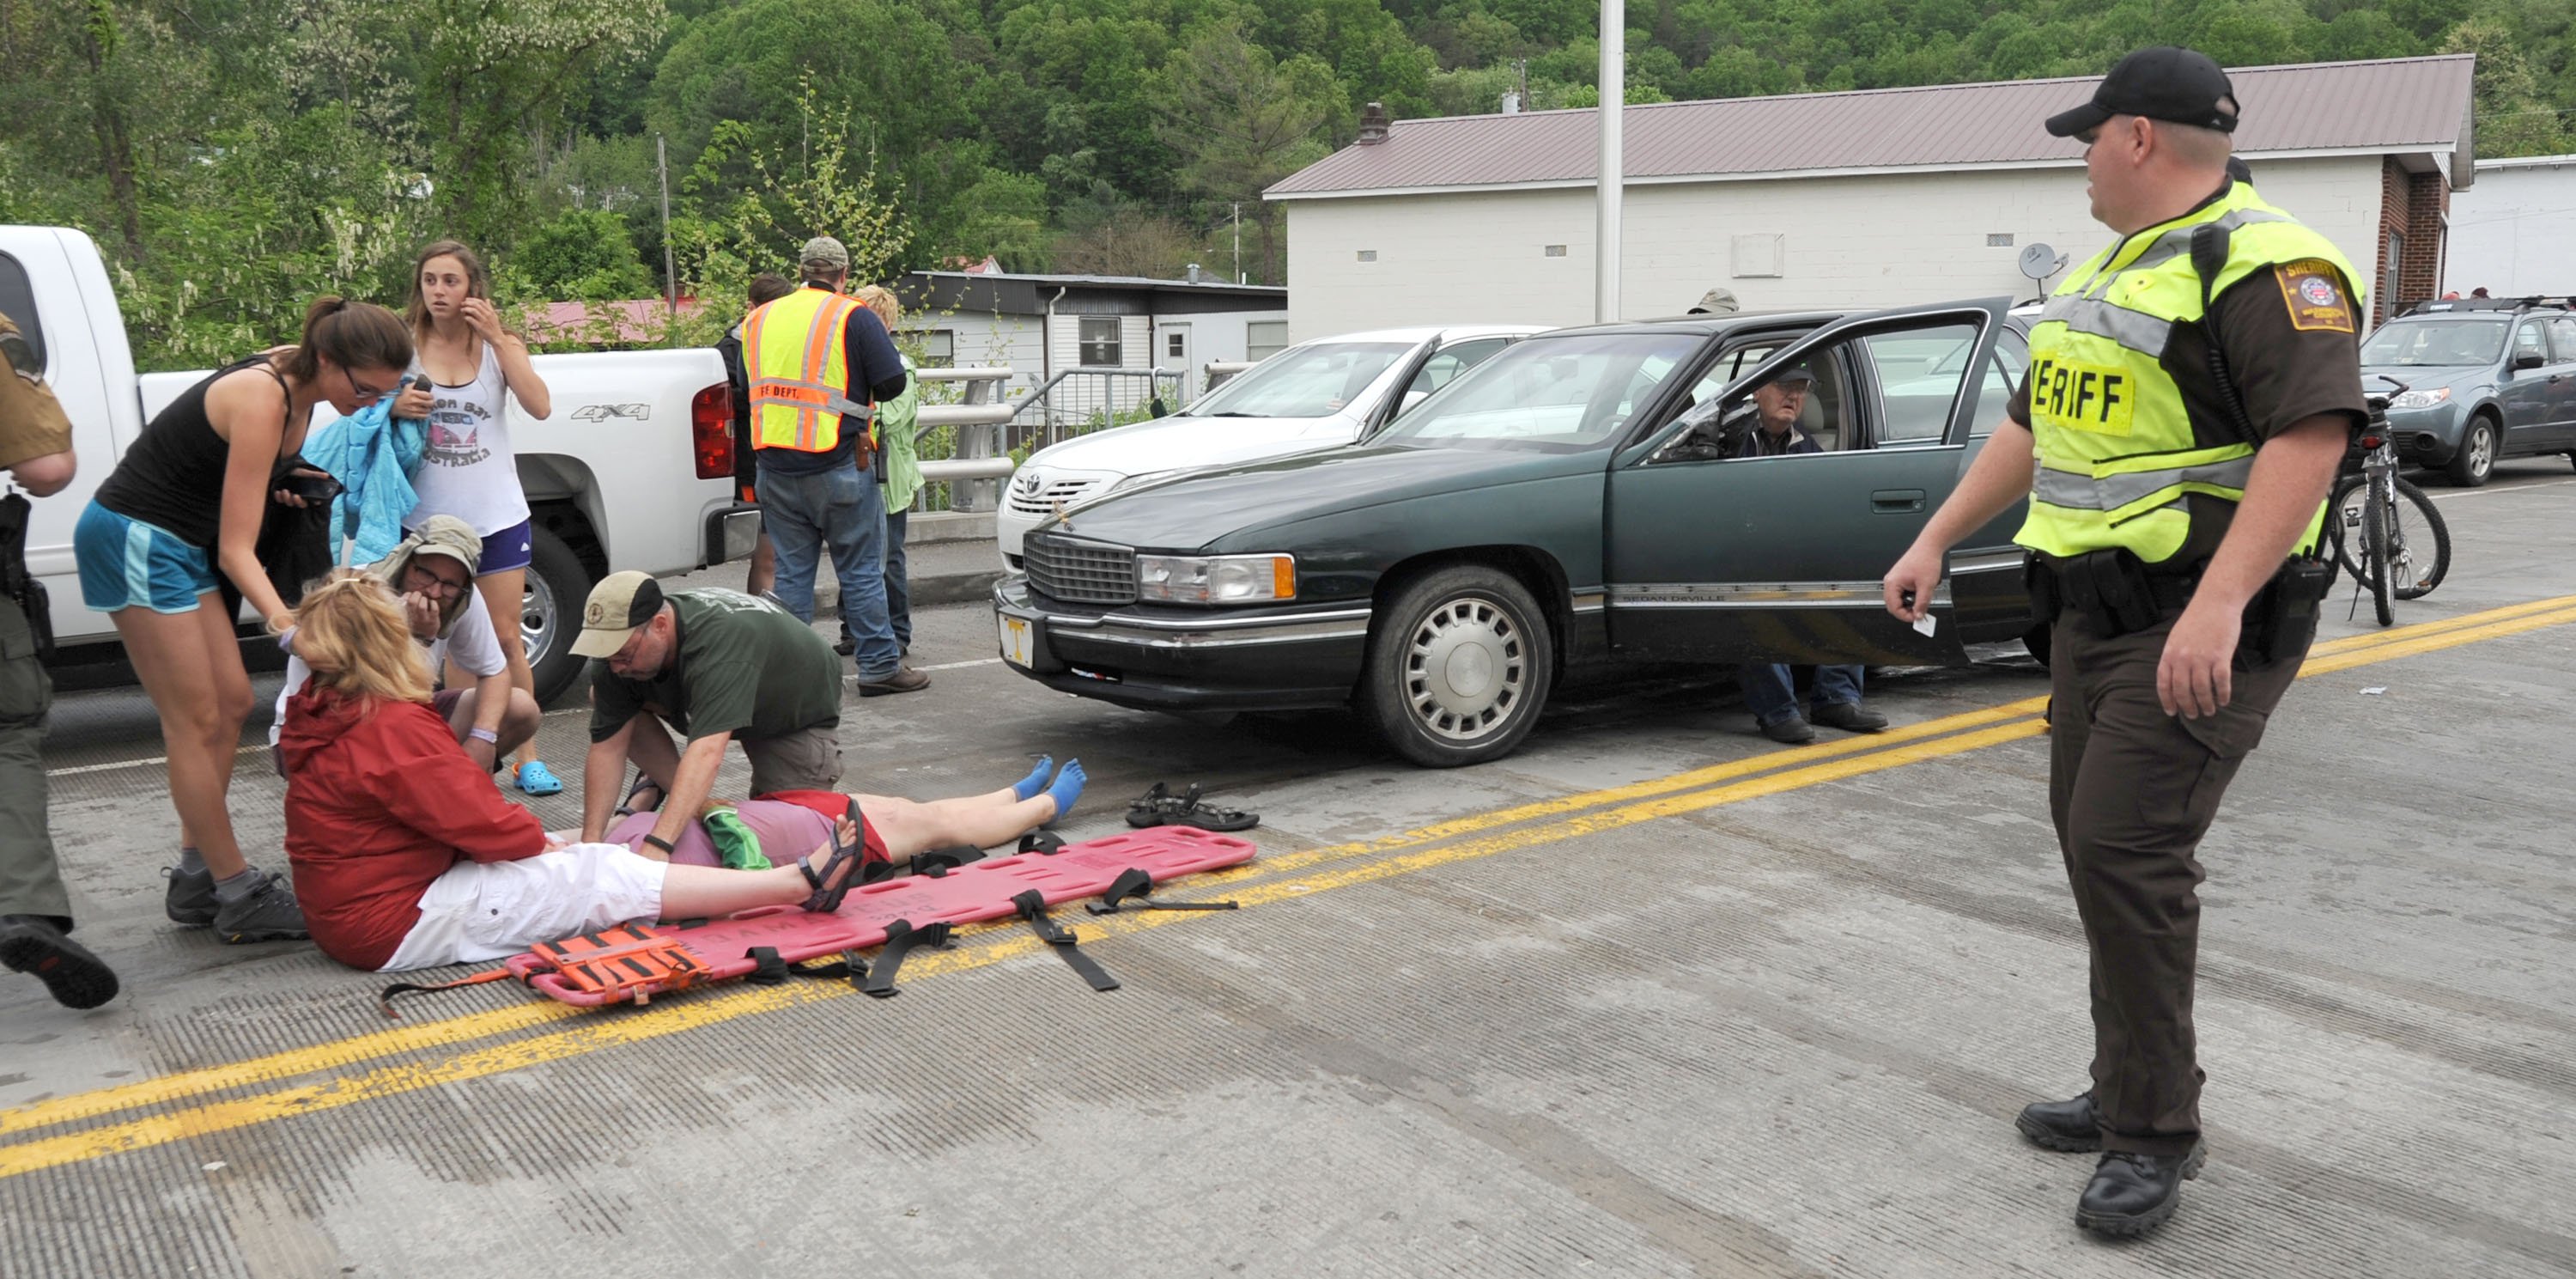 Emergency personnel respond to one of the people hit by a car during the beginning of the Hikers Parade at the Trail Days festival in Damascus, Virginia, USA. Photo: AP